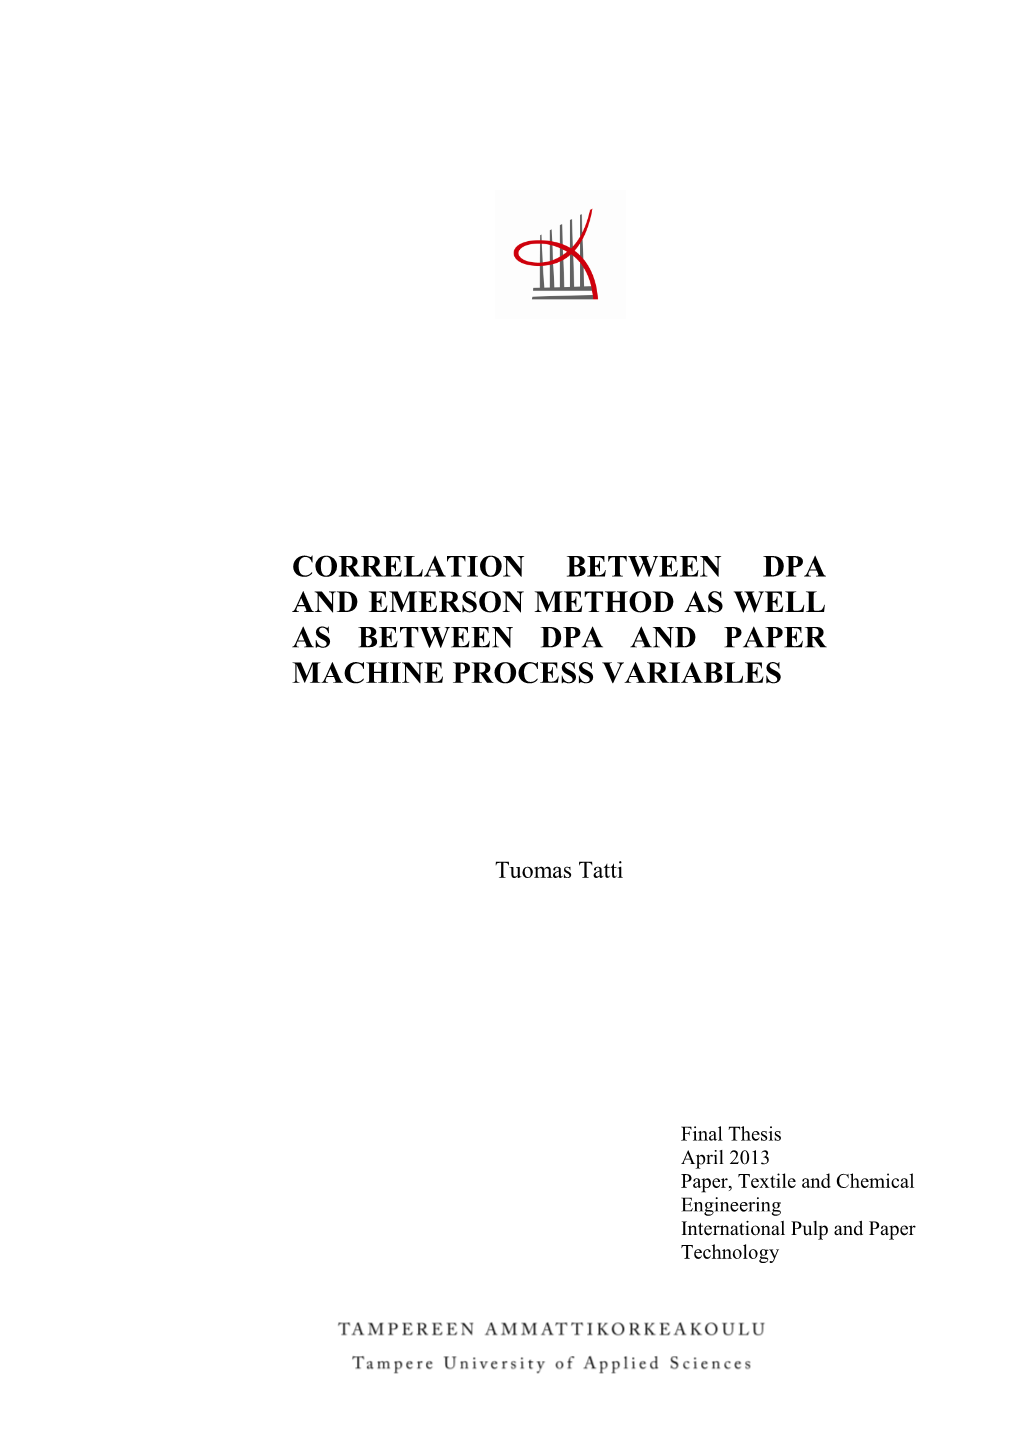 Correlation Between Dpa and Emerson Method As Well As Between Dpa and Paper Machine Process Variables